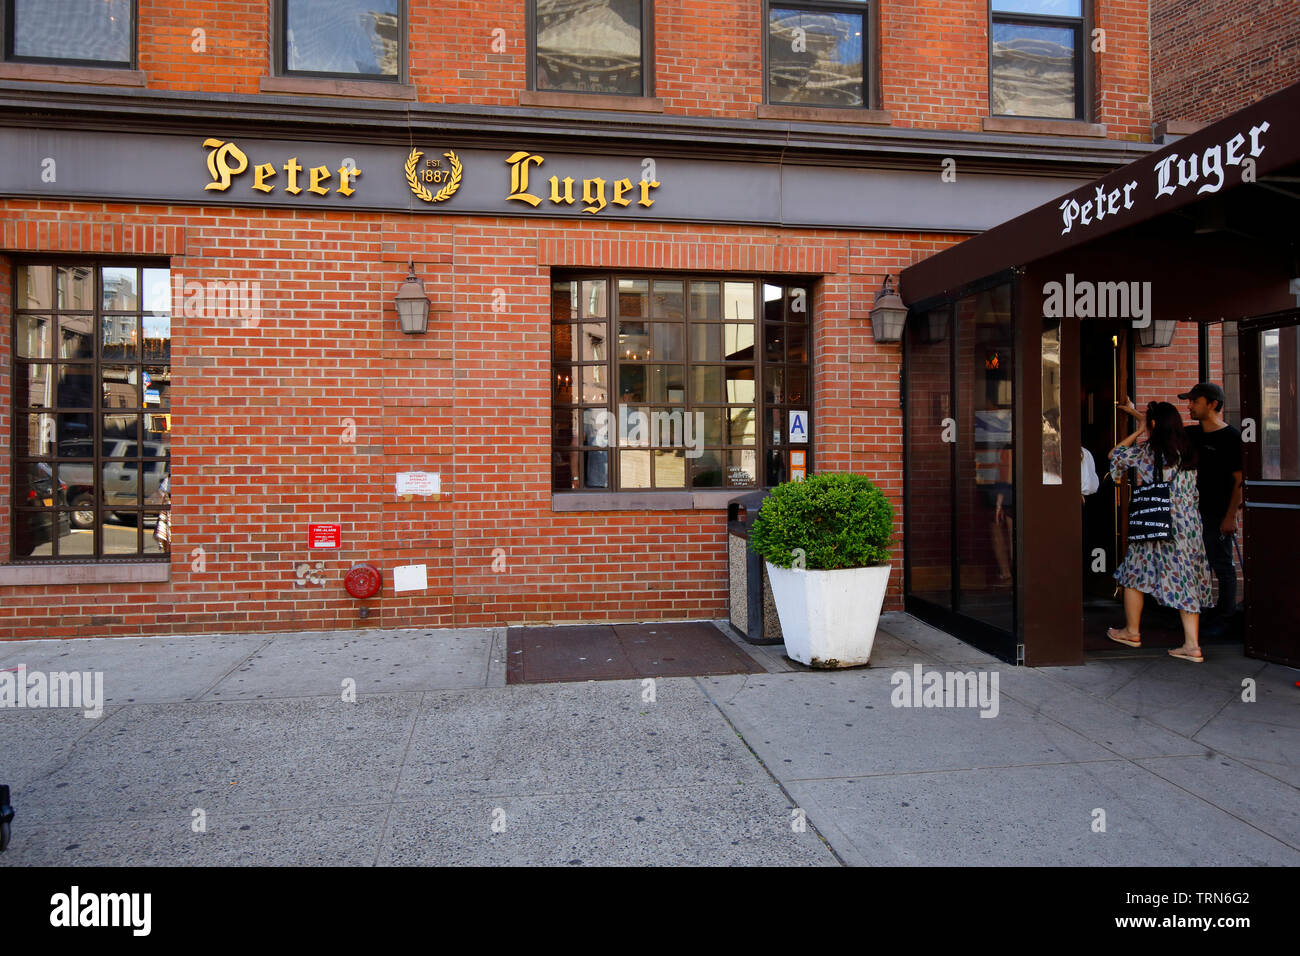 Peter Luger Steak House, 178 Broadway, Brooklyn, NY. exterior storefront of a steakhouse in the Williamsburg neighborhood. Stock Photo